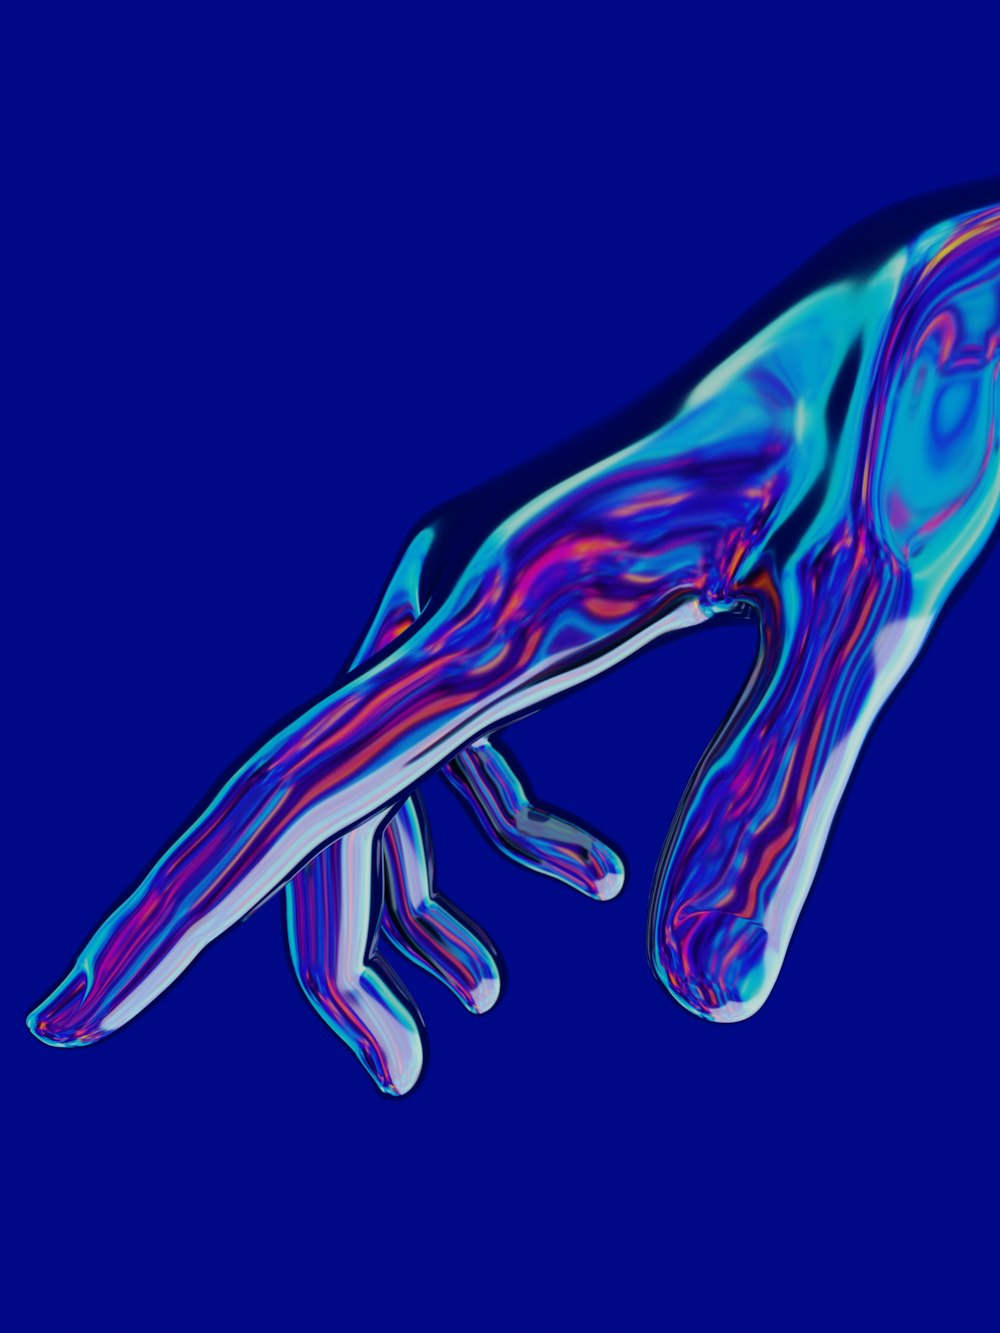 a blue and purple image of a person's hand